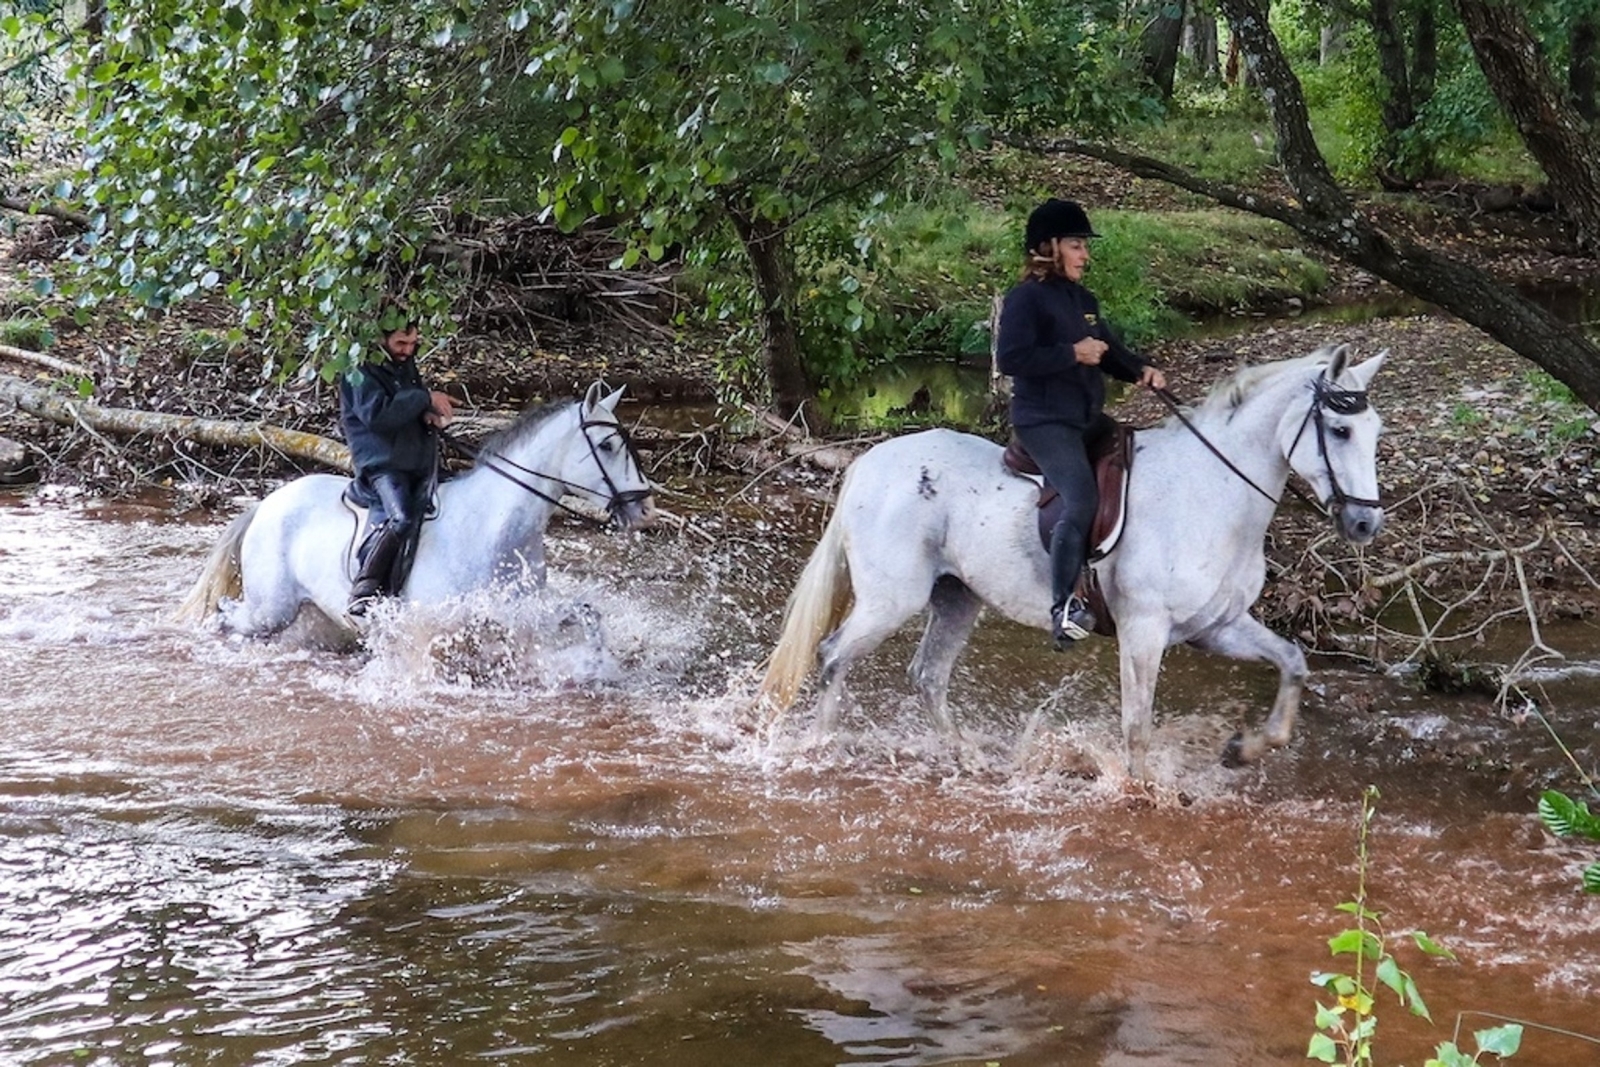 Riding through water in Andalucia in Spain